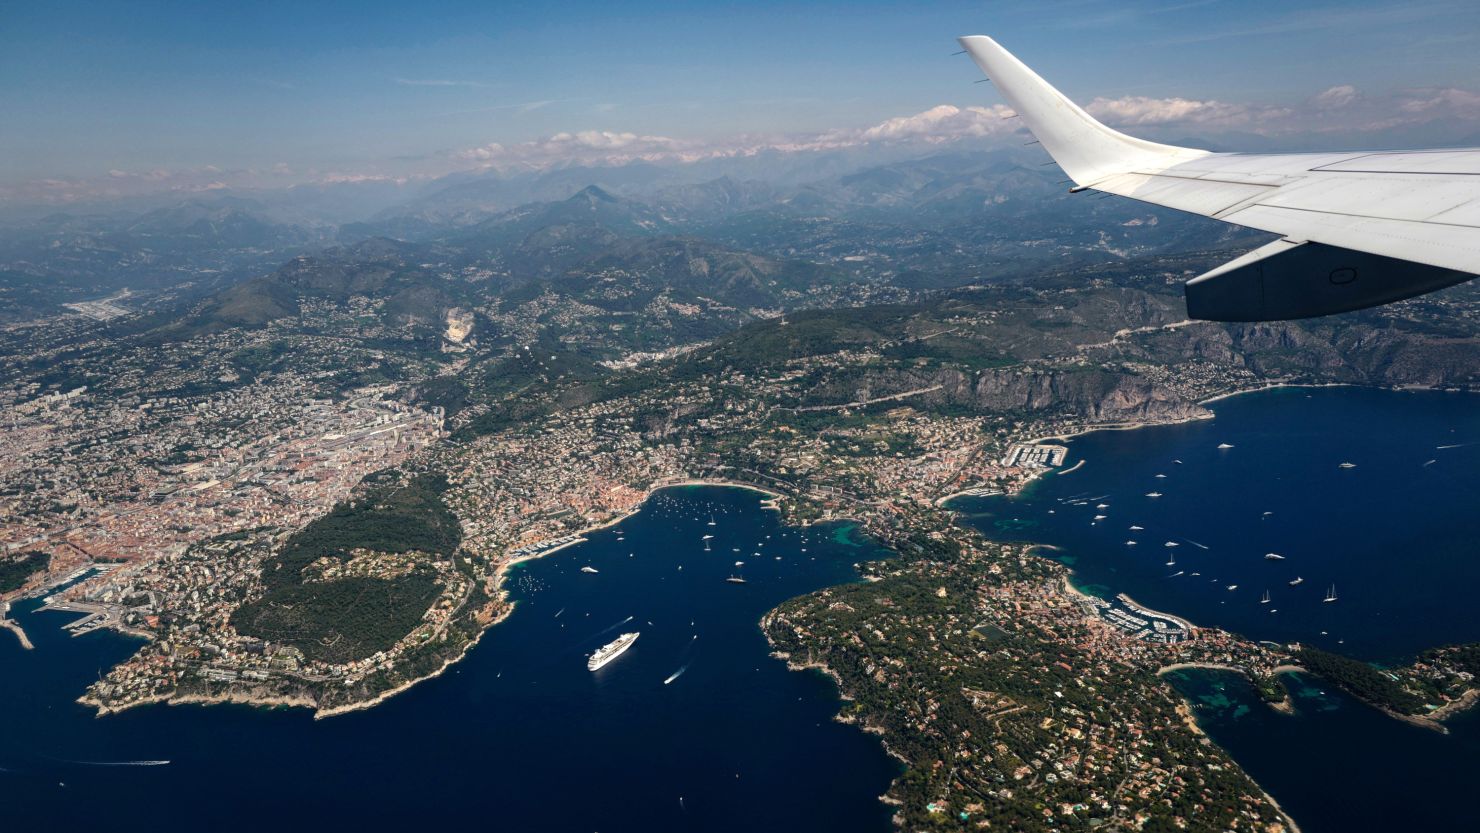 Fly into Nice and you'll get top notch views of the Cote d'Azur.